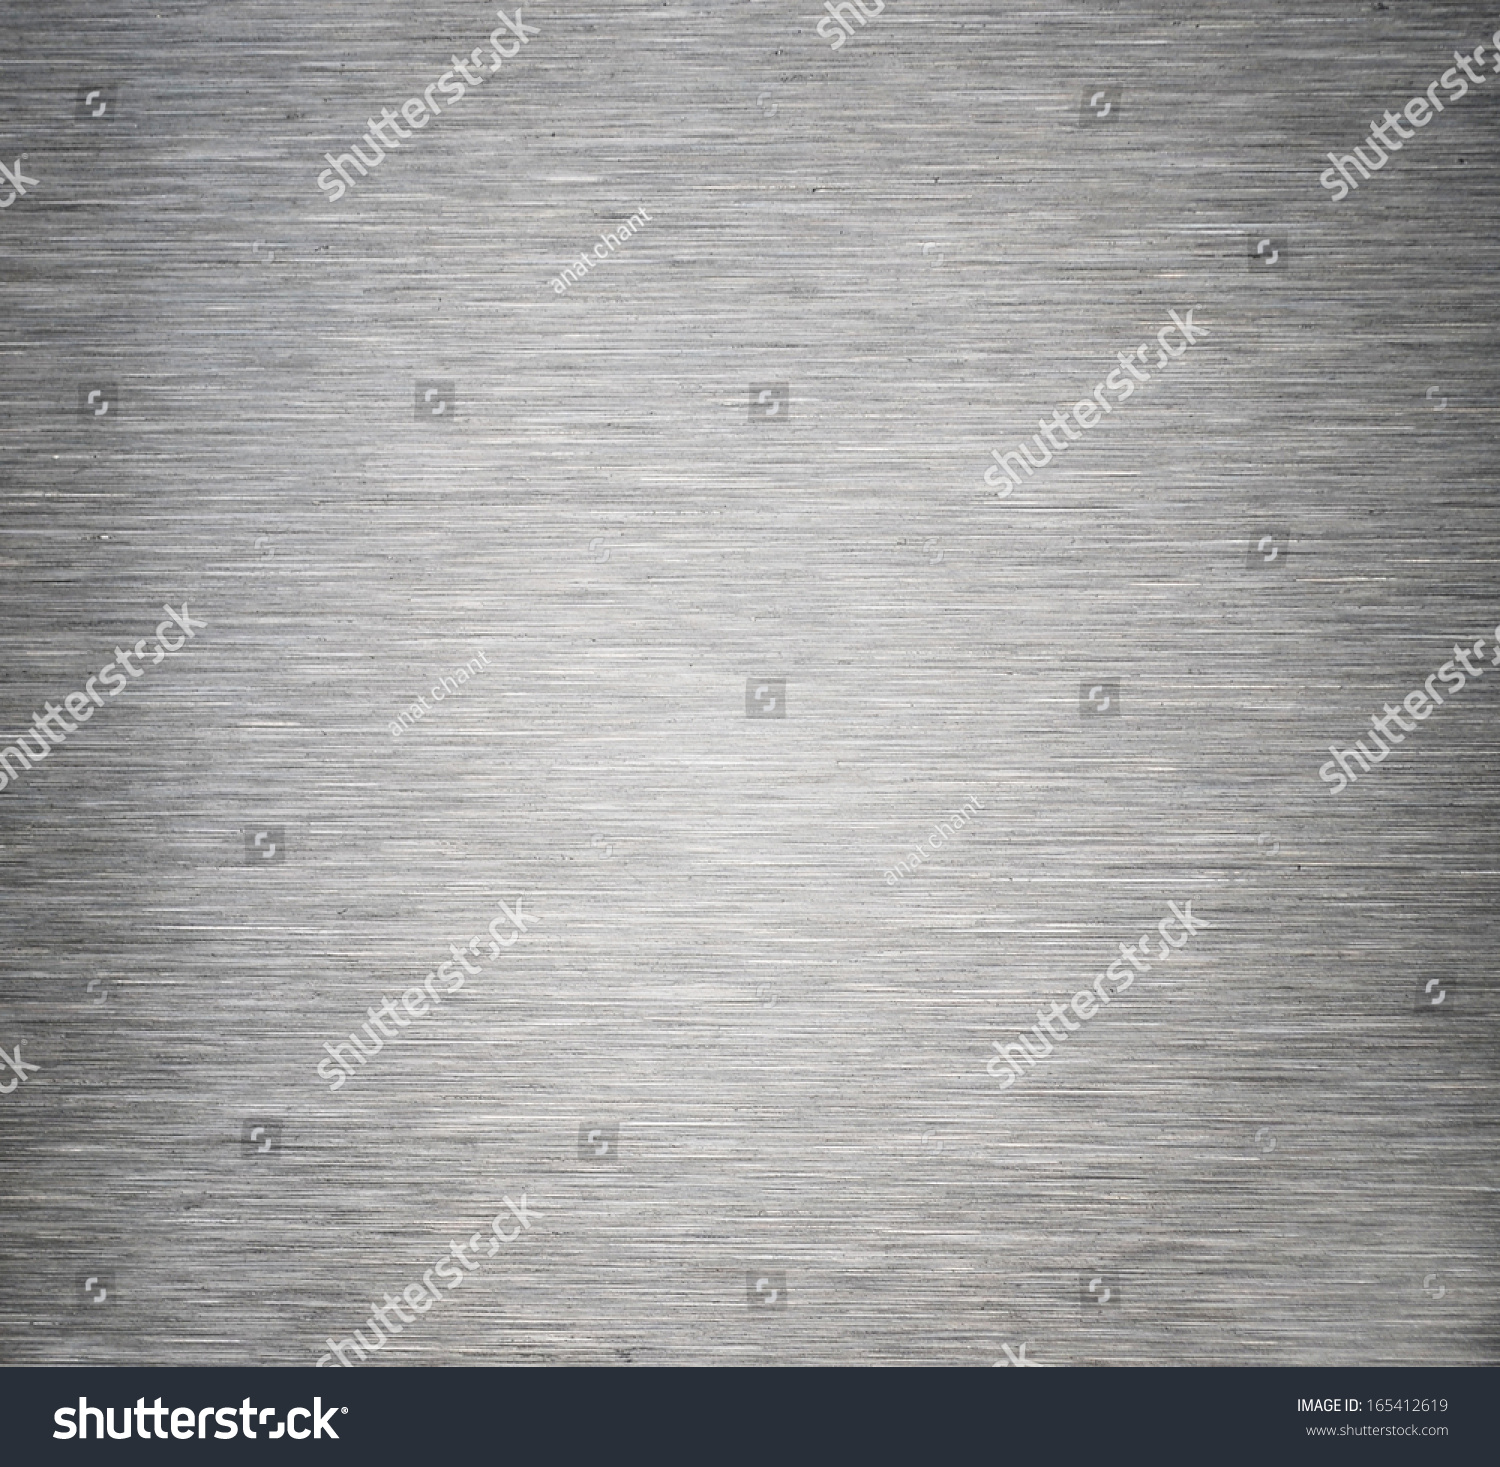 Metal Brushed Shiny Surface Texture Stock Photo 165412619 - Shutterstock